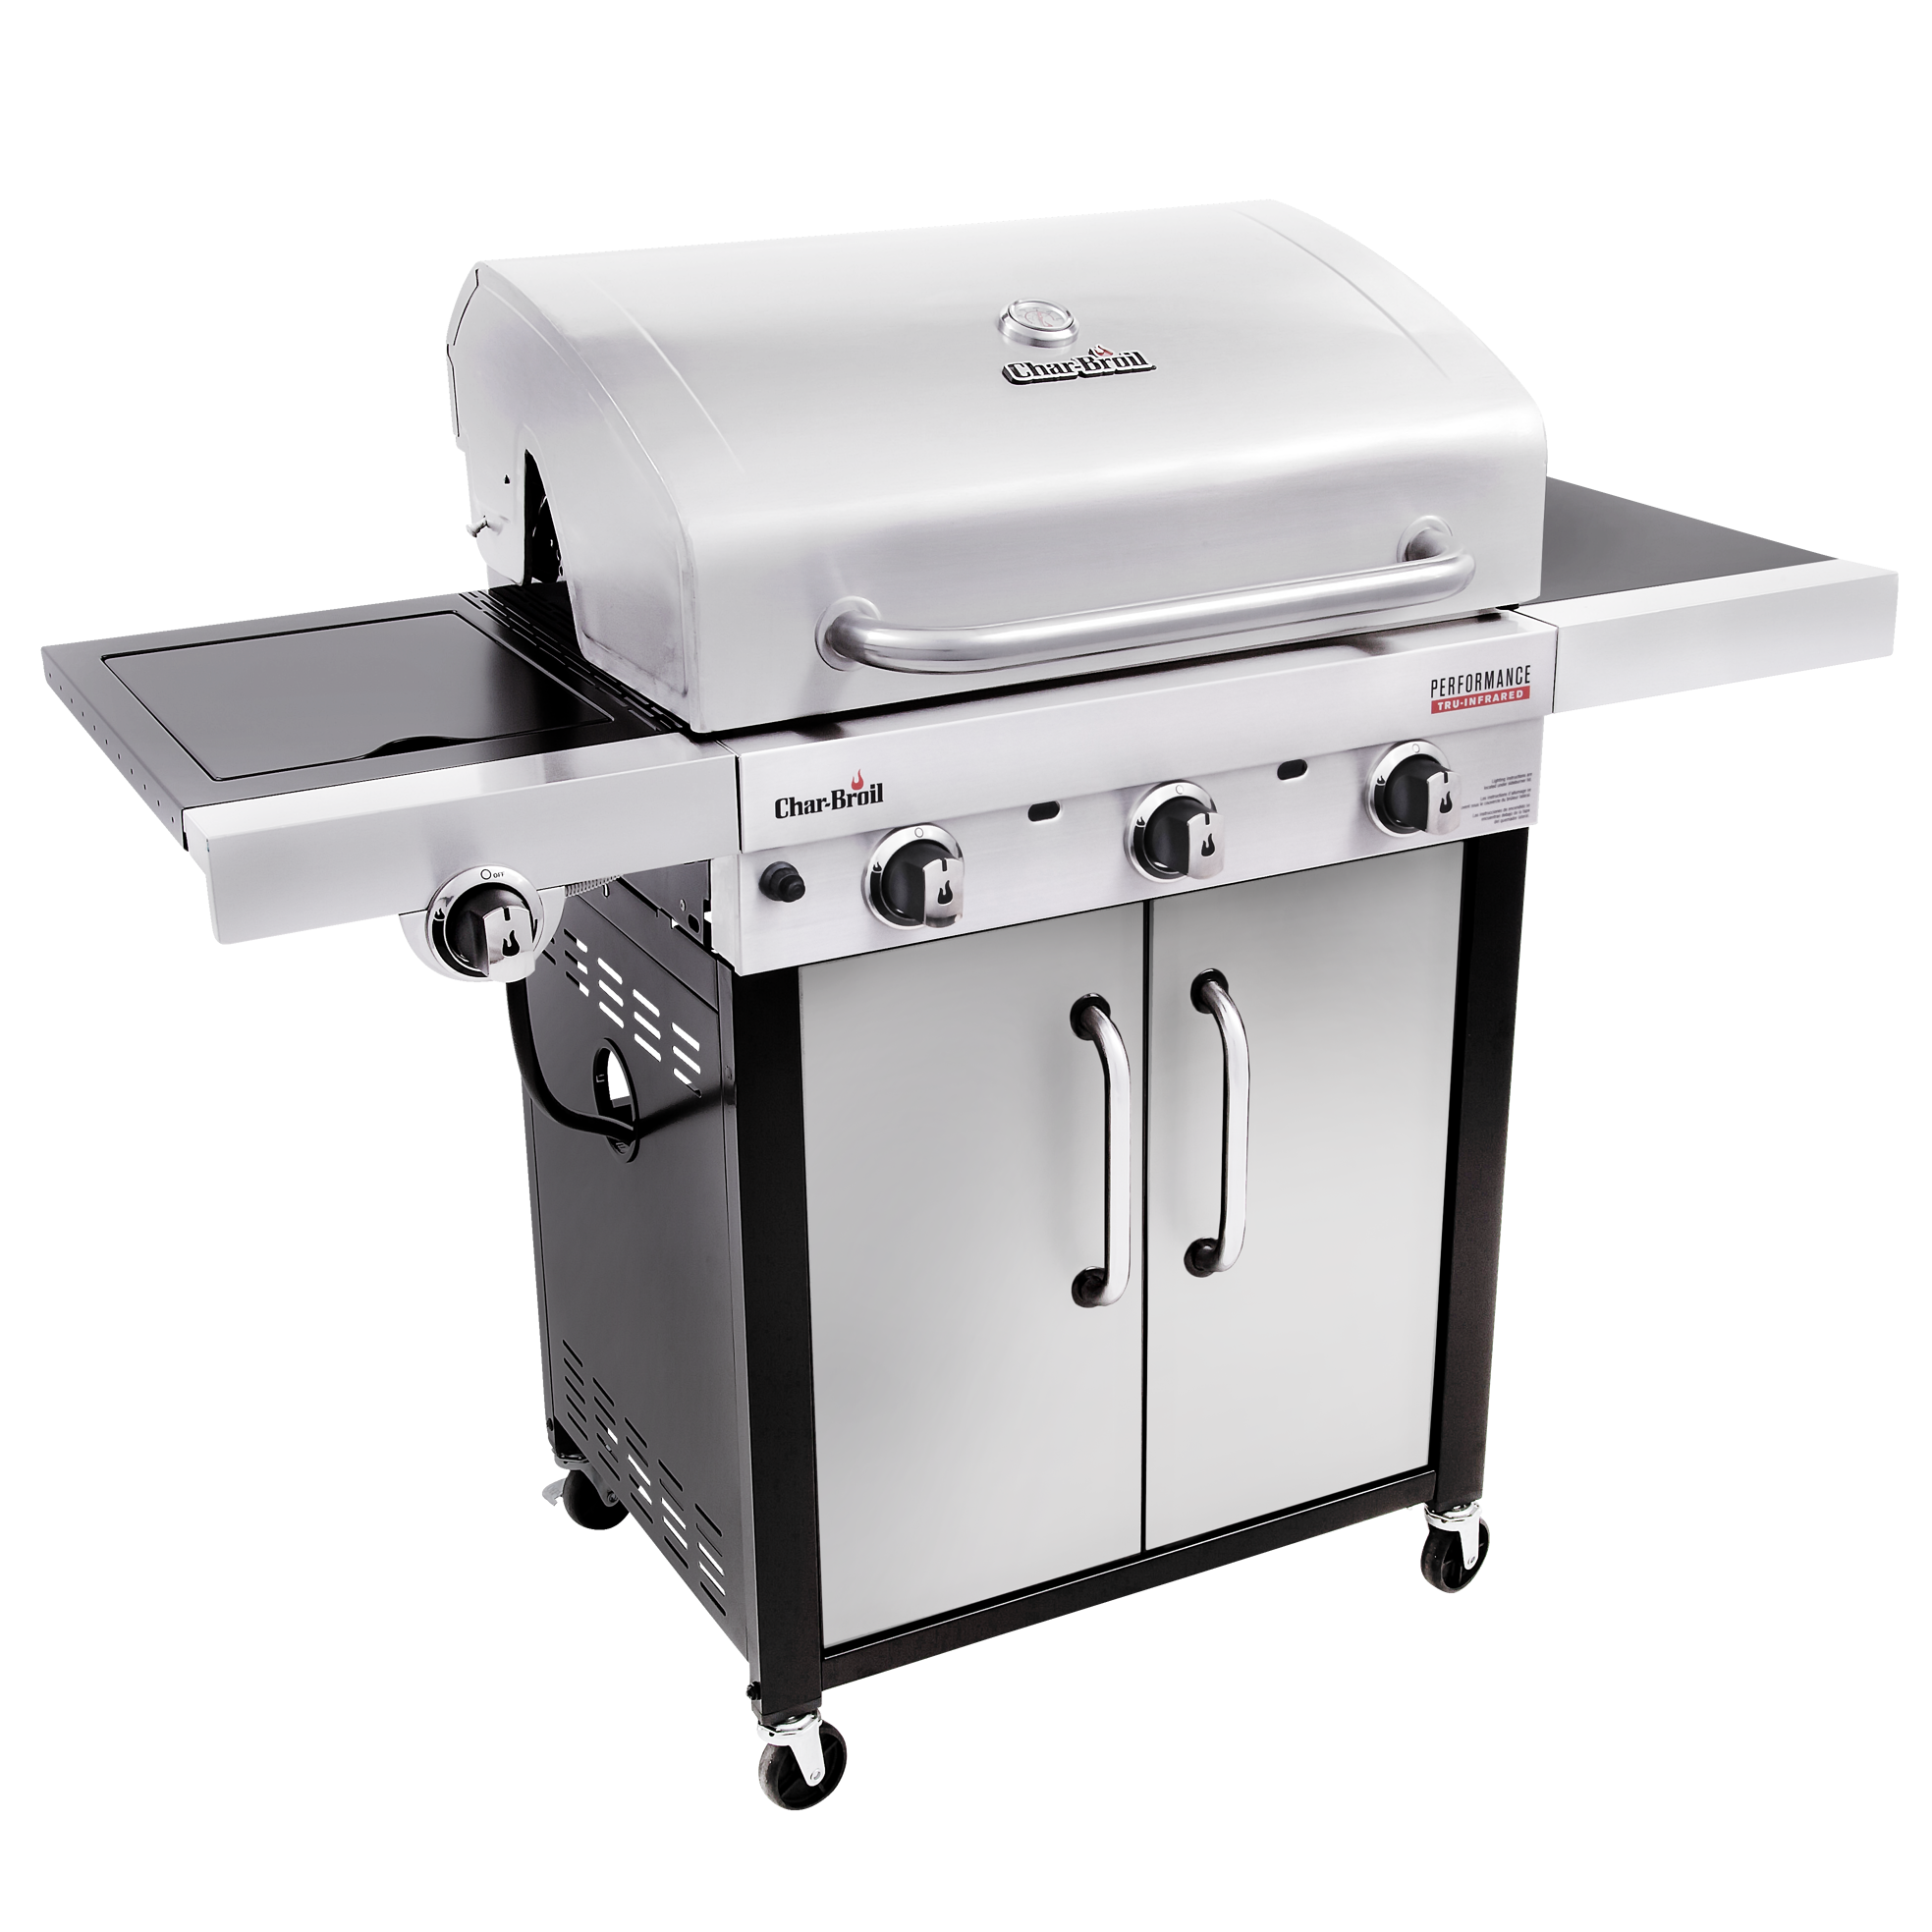 Char broil tru infrared grill owner